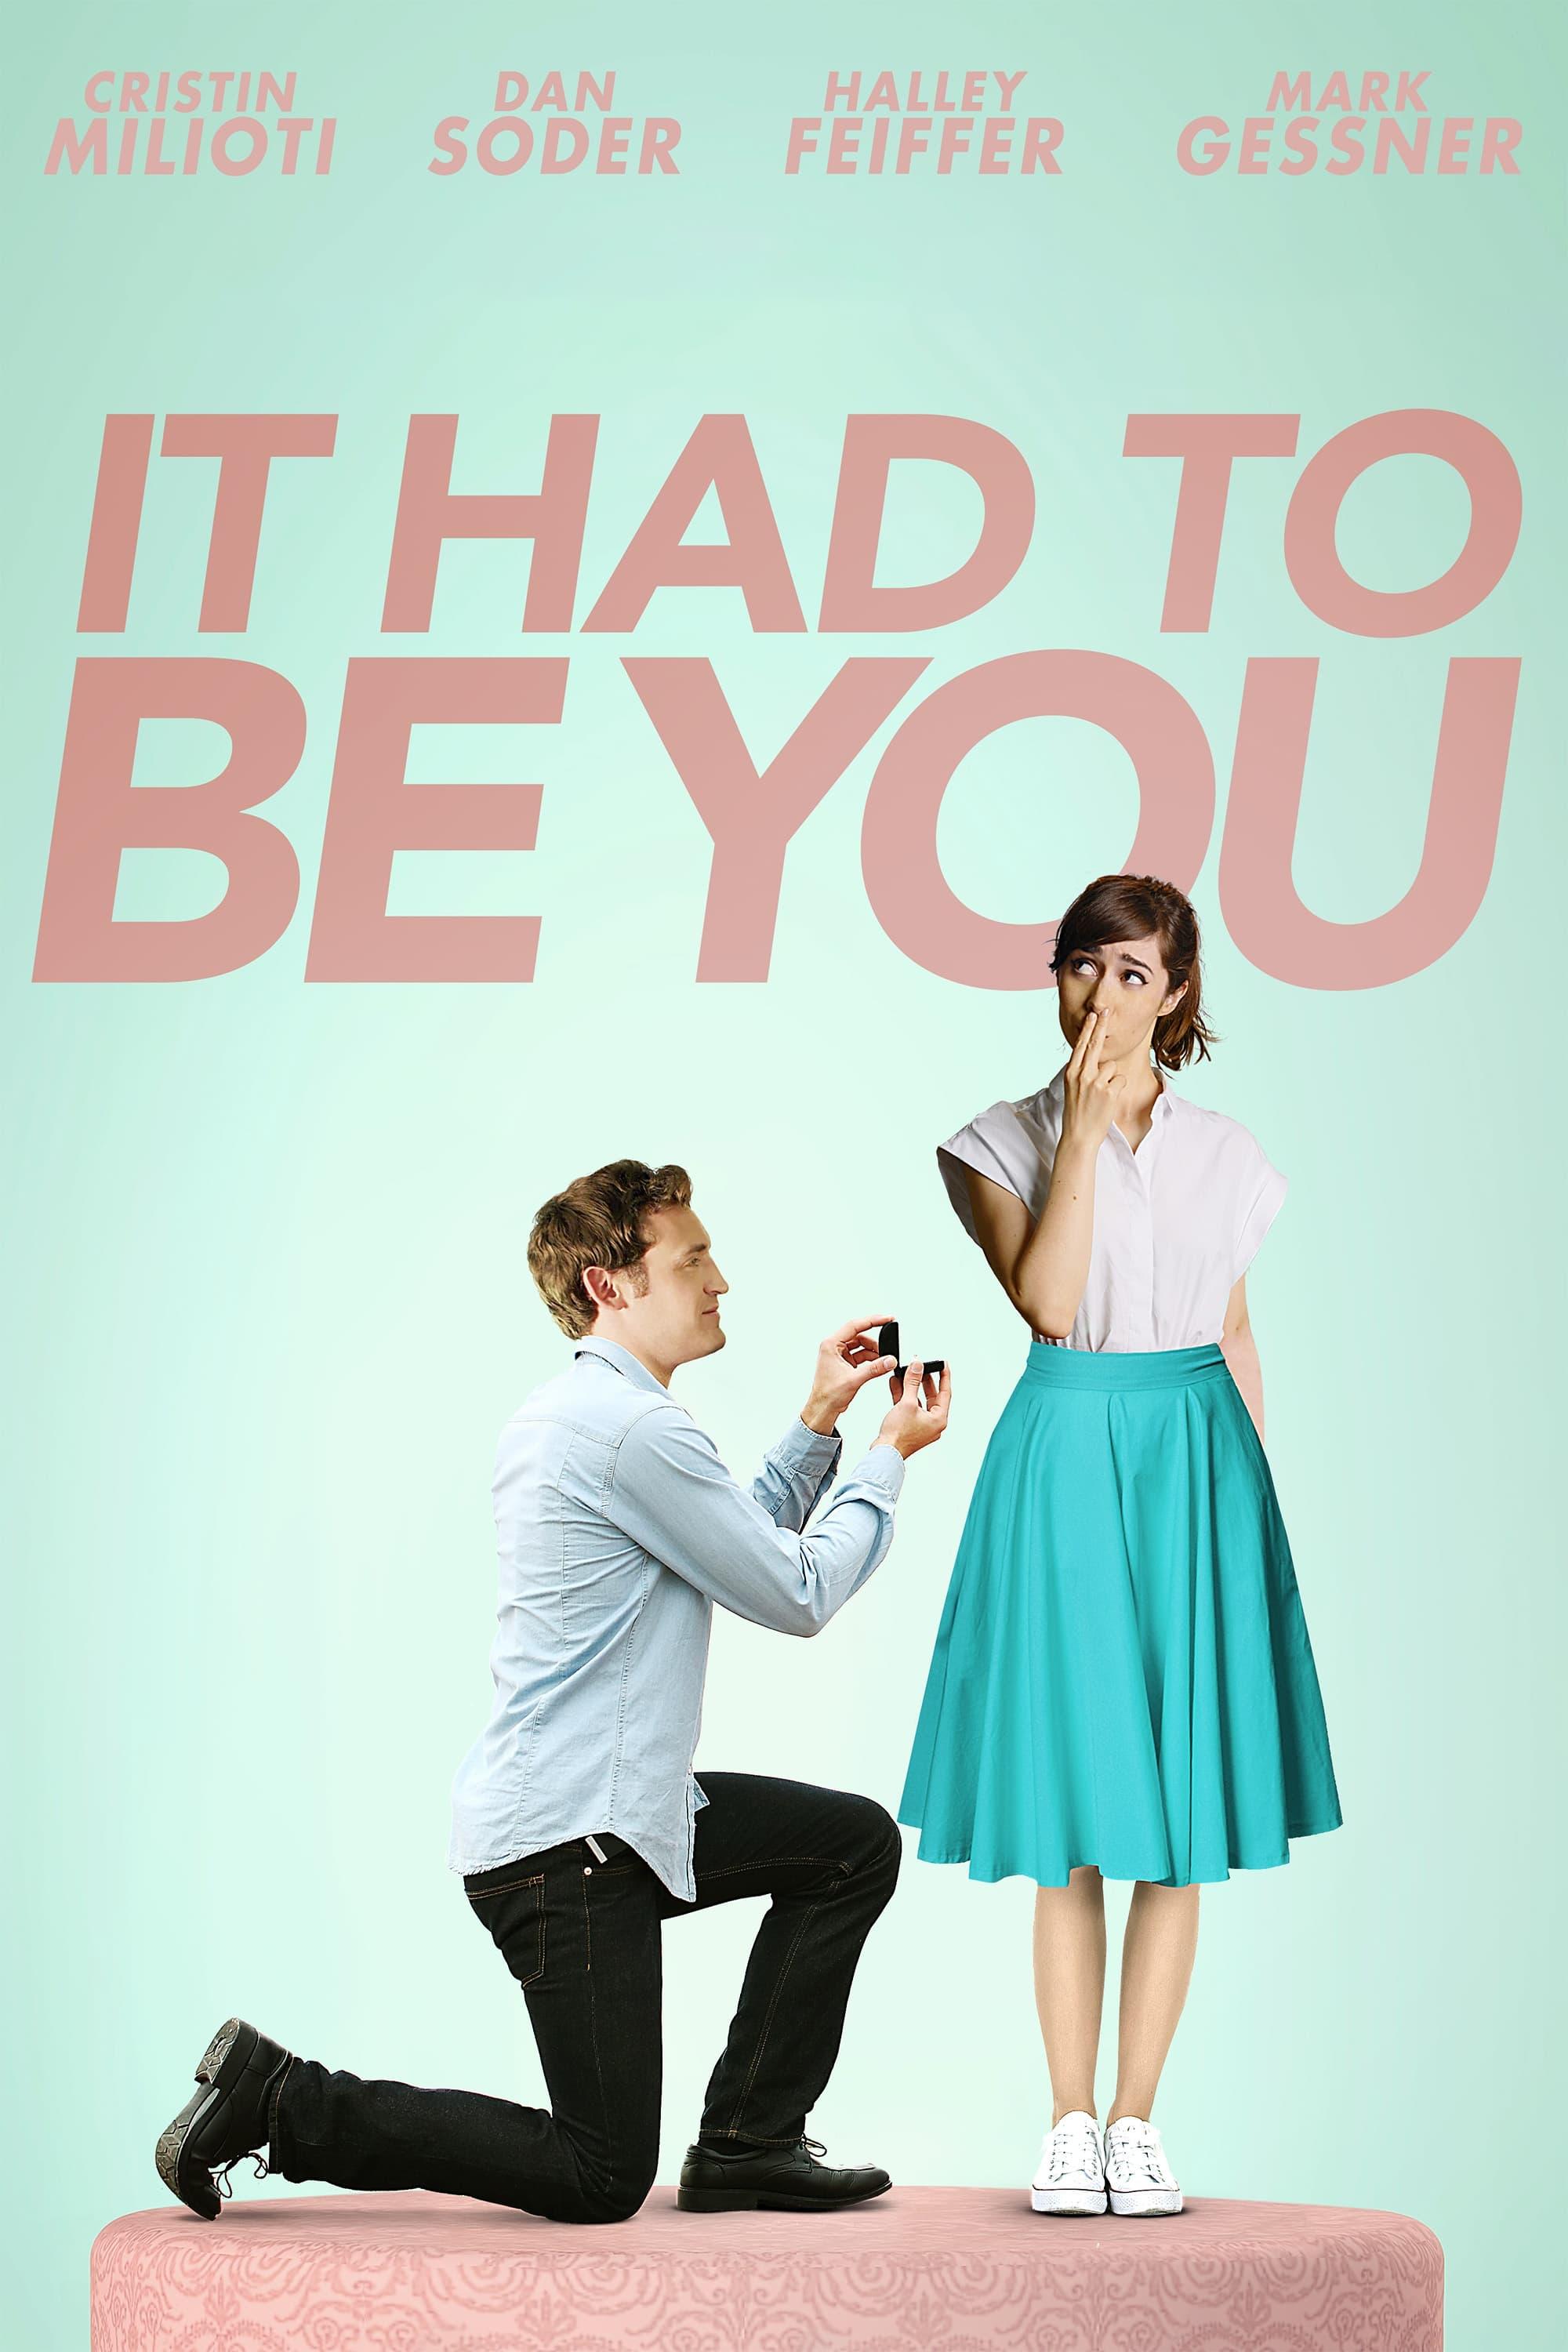 It Had to Be You poster